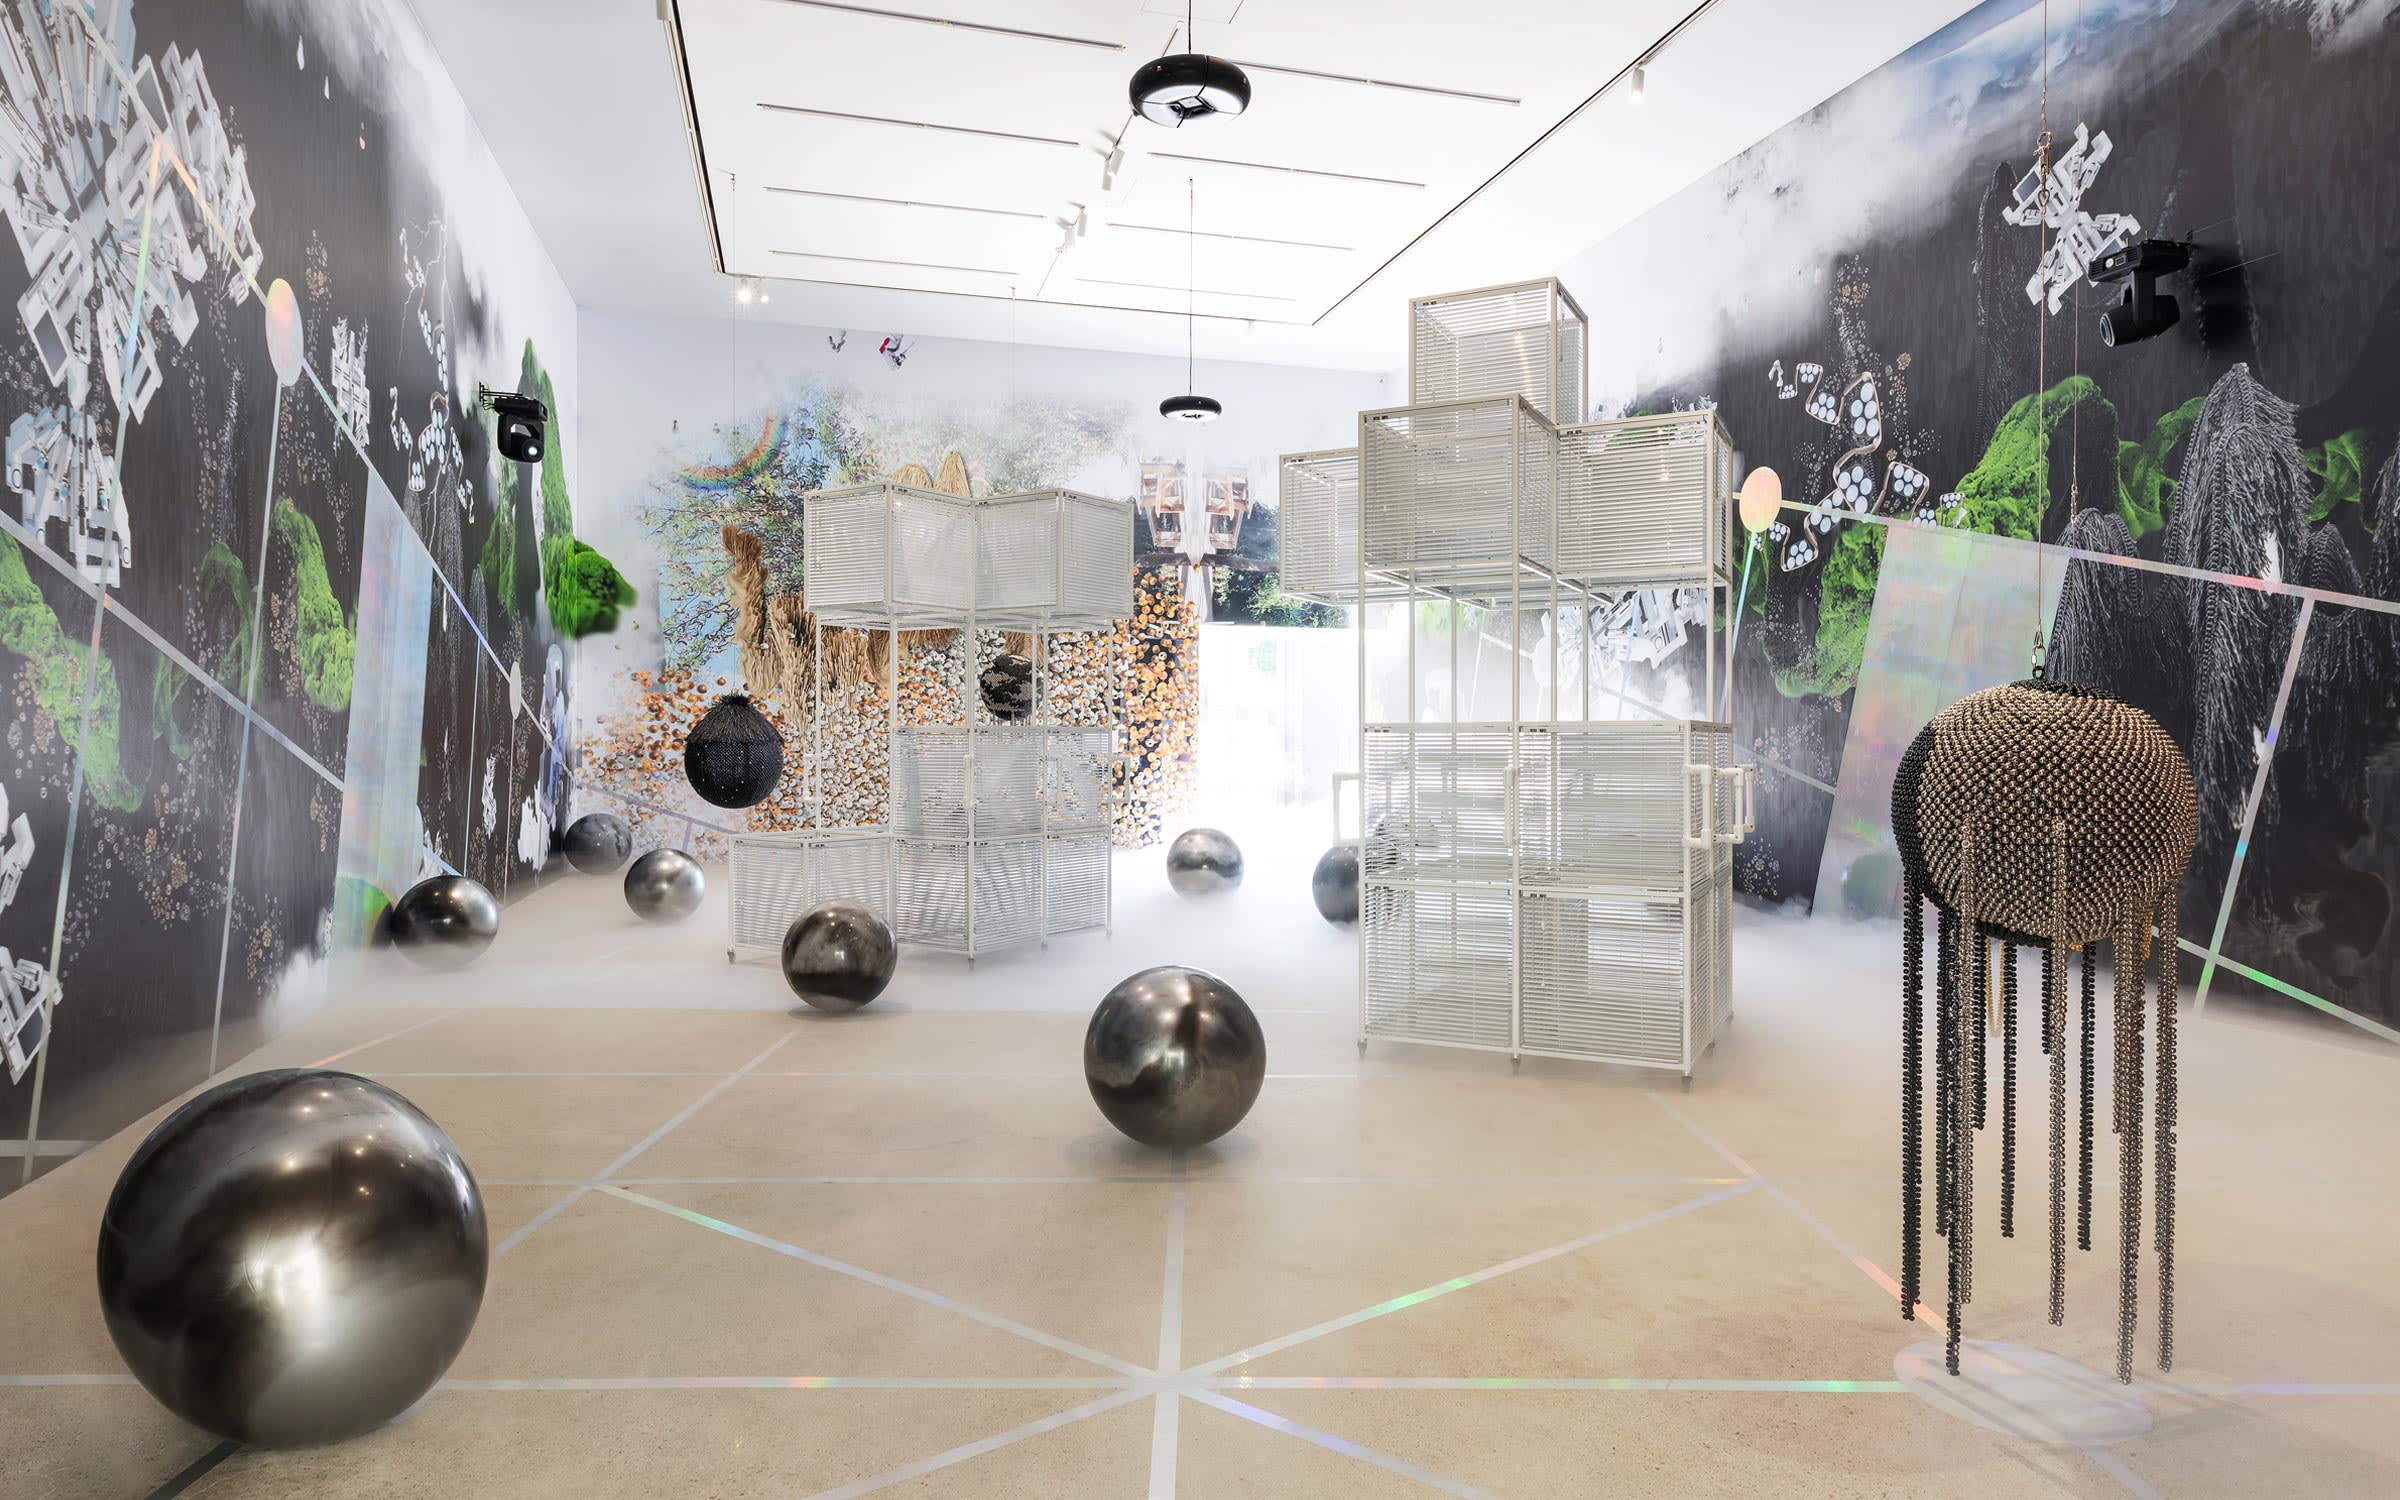 Haegue Yang, ‘When The Year 2000 Comes’, Installation view. Courtesy of Kukje Gallery, Seoul and Busan.